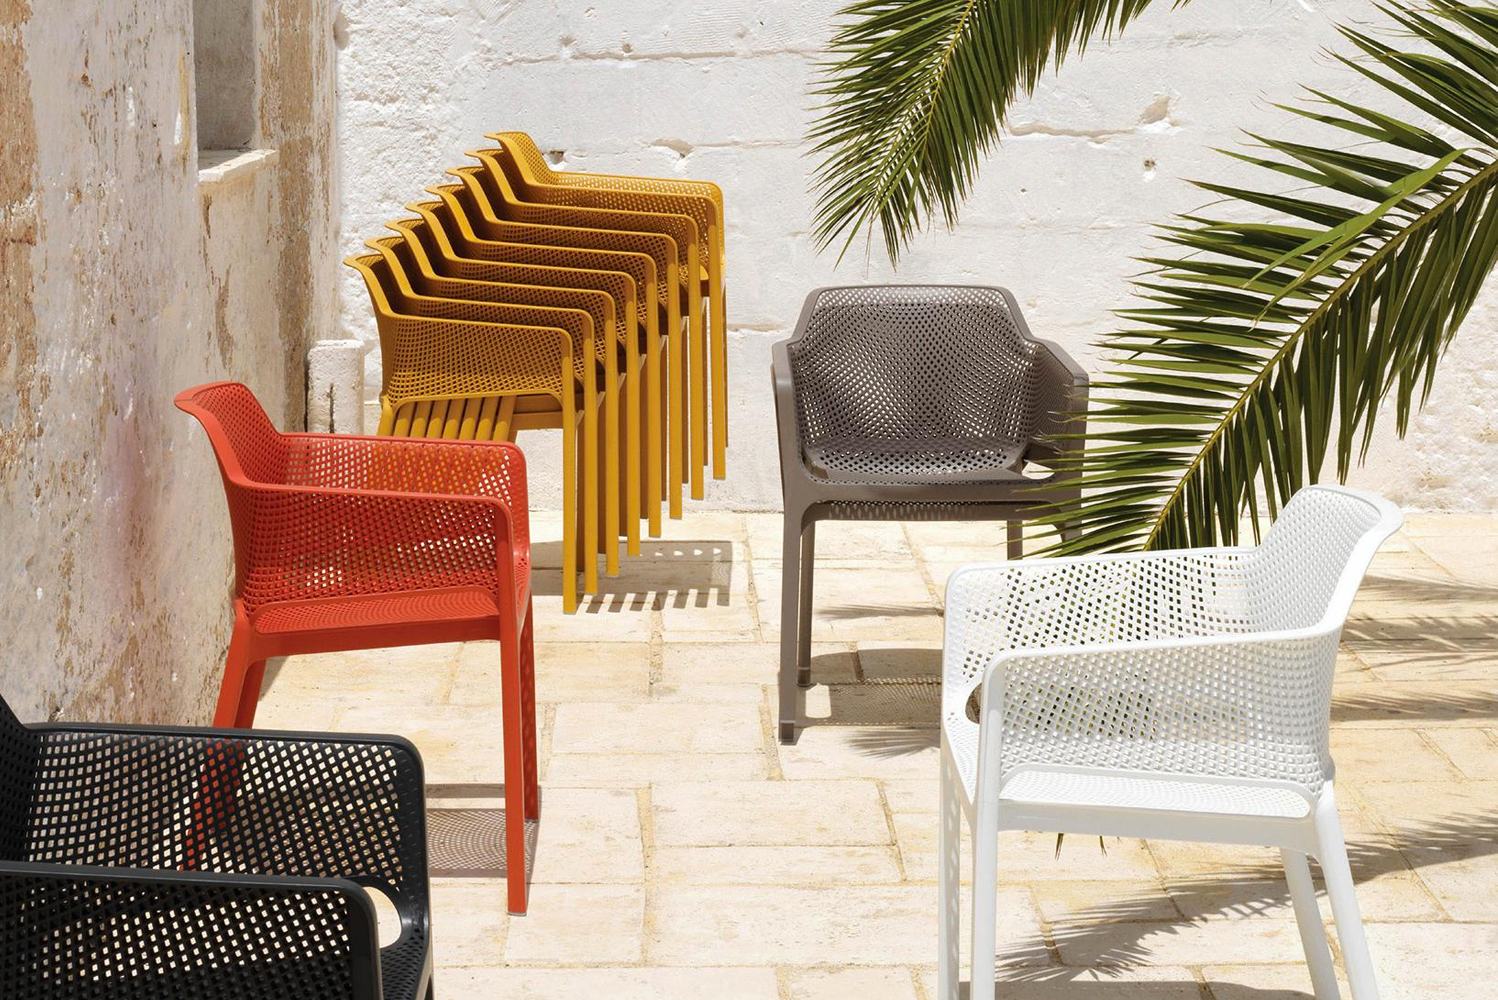 Introducing the Euro Form collection by Texacraft a contract furniture brand known for its outdoor and casual offerings 